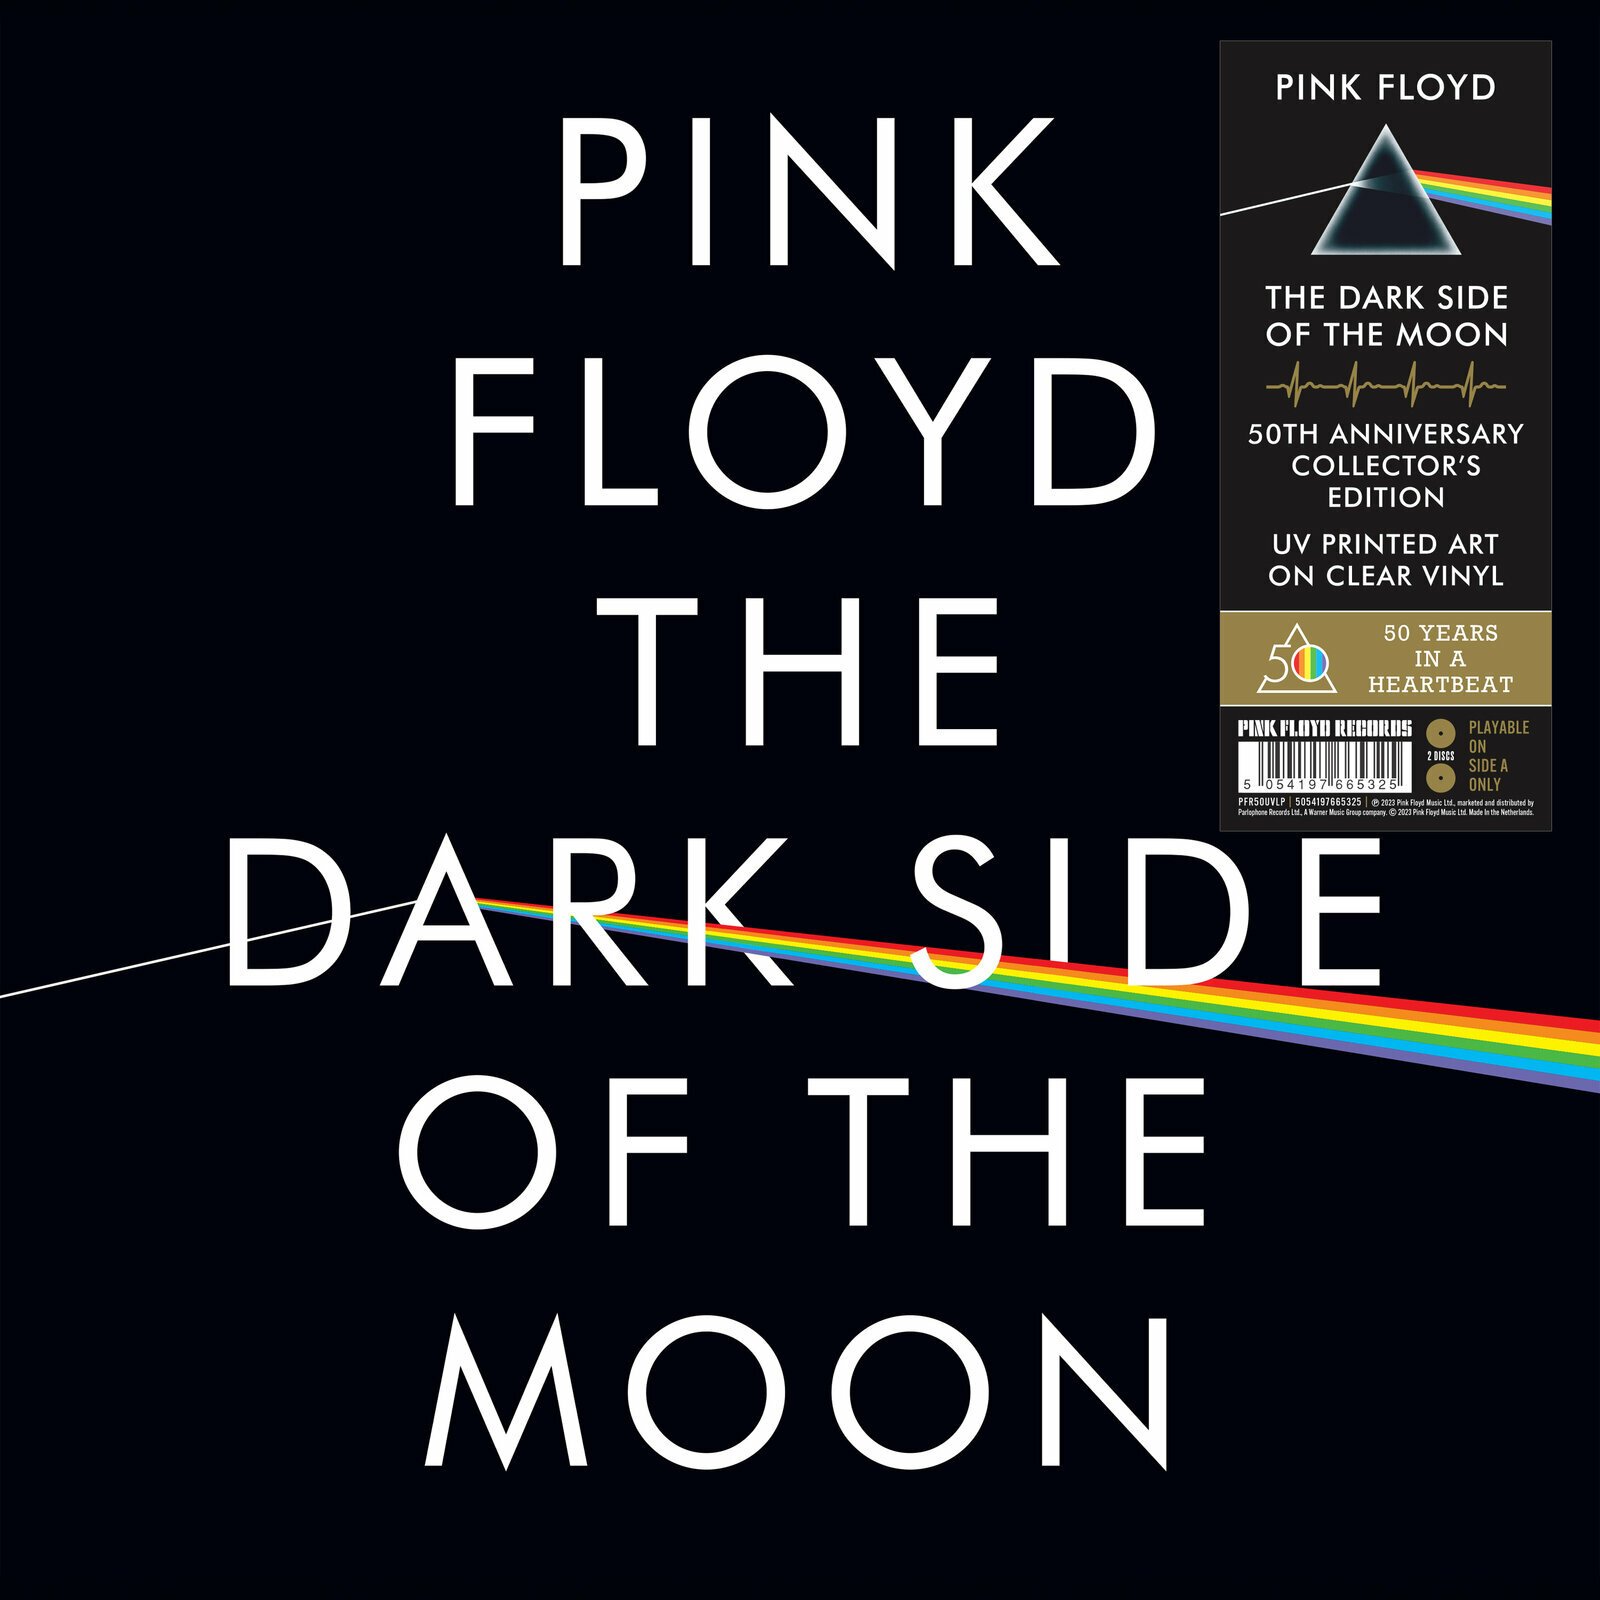 LP Pink Floyd - The Dark Side Of The Moon (50th Anniversary Edition) (Limited Edition) (Picture Disc) (2 LP)